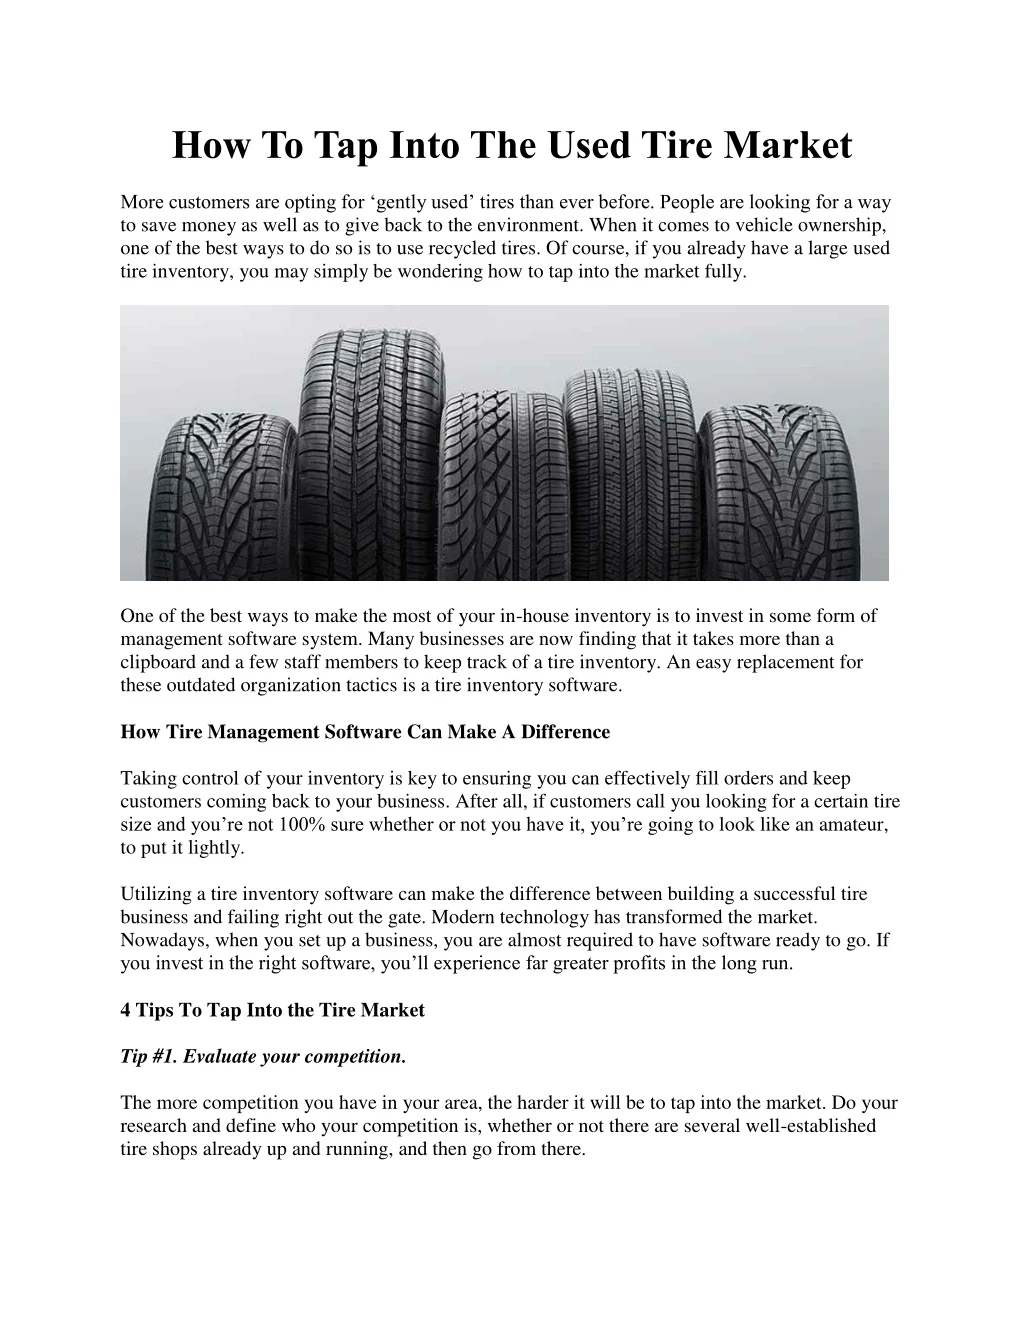 how to tap into the used tire market